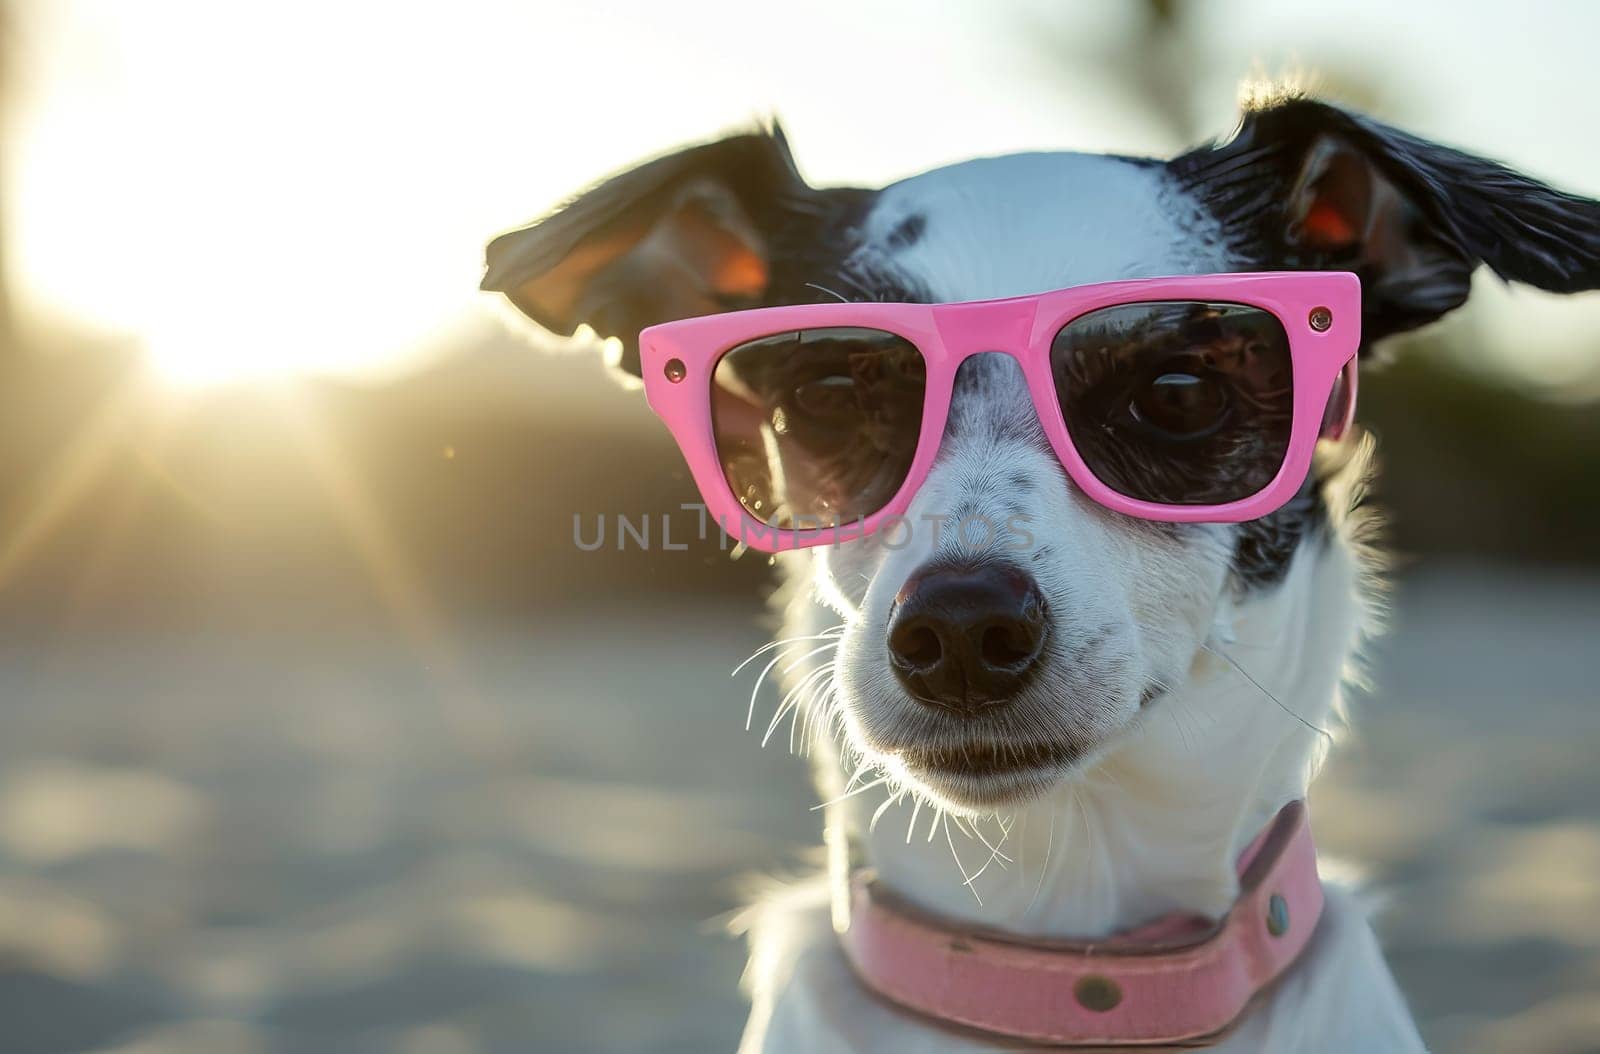 Dog Wearing Pink Sunglasses and Collar For a Stylish Look by gcm